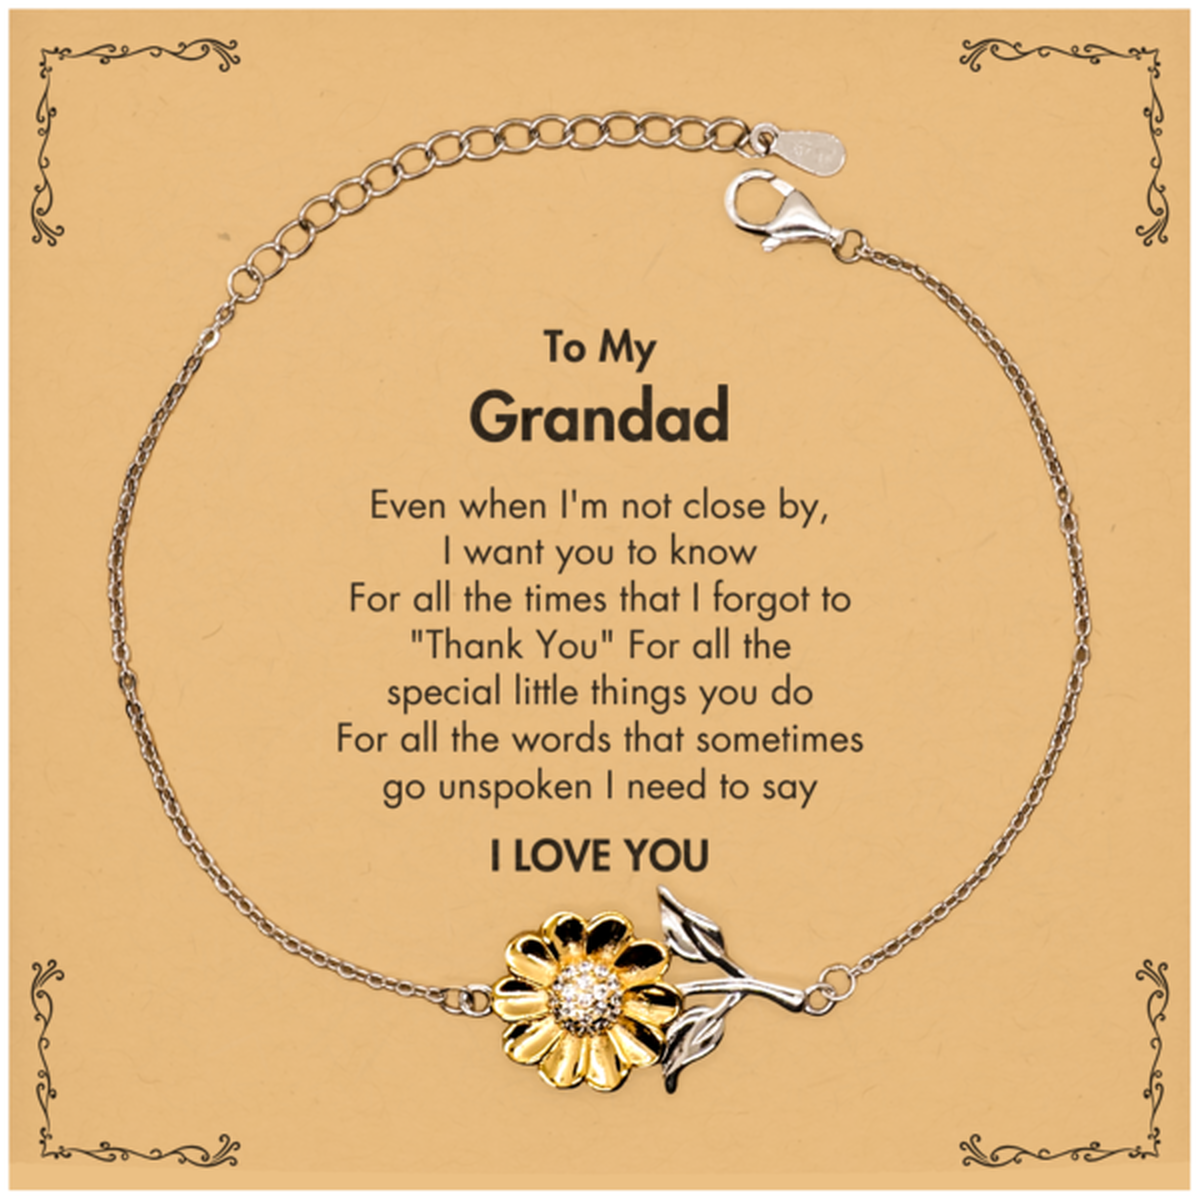 Thank You Gifts for Grandad, Keepsake Sunflower Bracelet Gifts for Grandad Birthday Mother's day Father's Day Grandad For all the words That sometimes go unspoken I need to say I LOVE YOU